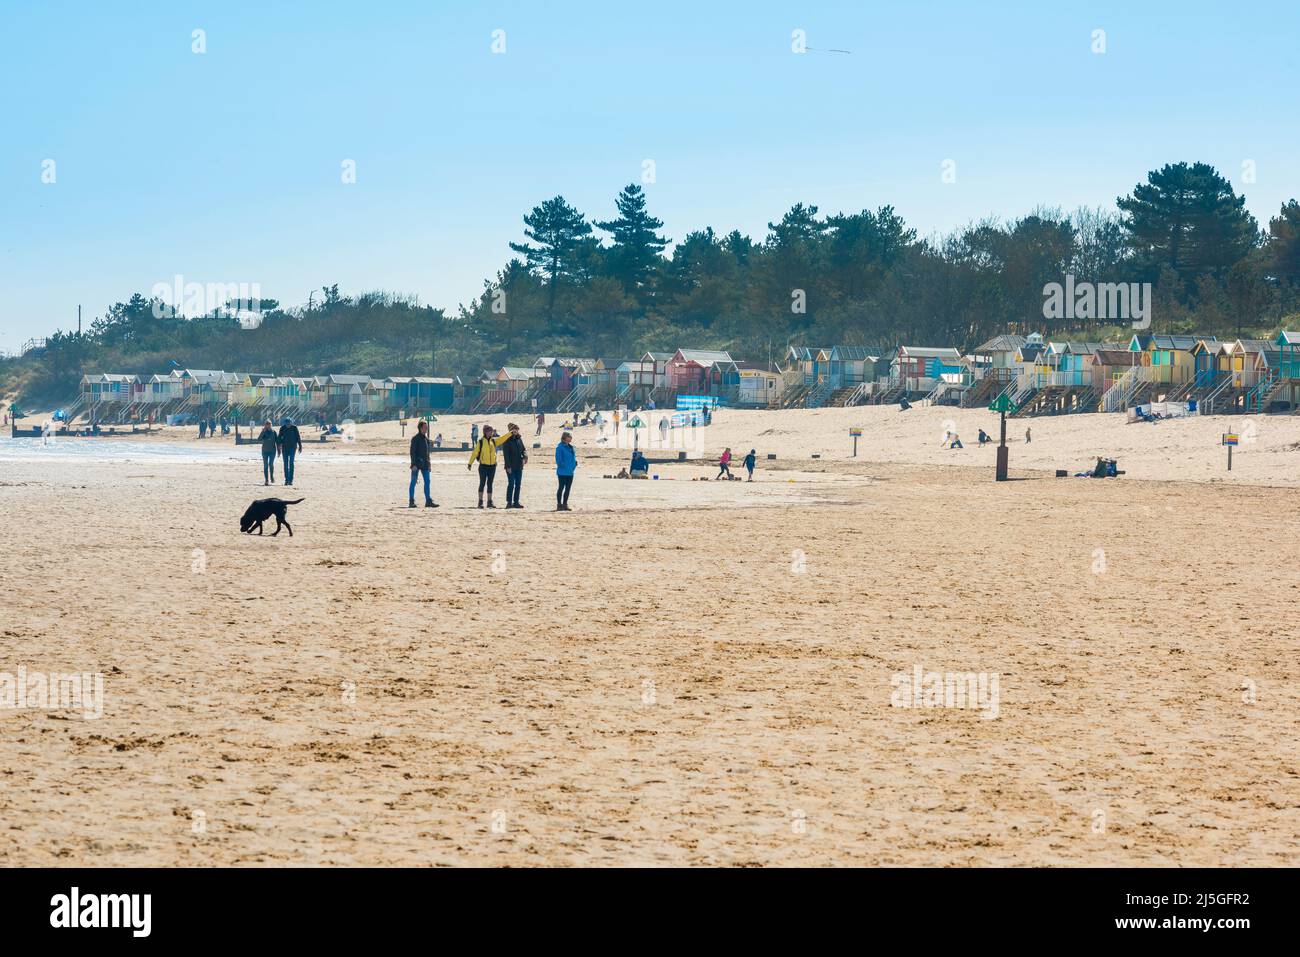 North Norfolk coast UK, view of people visiting the beach at Wells-next-the-Sea on the North Norfolk coast, England, UK Stock Photo